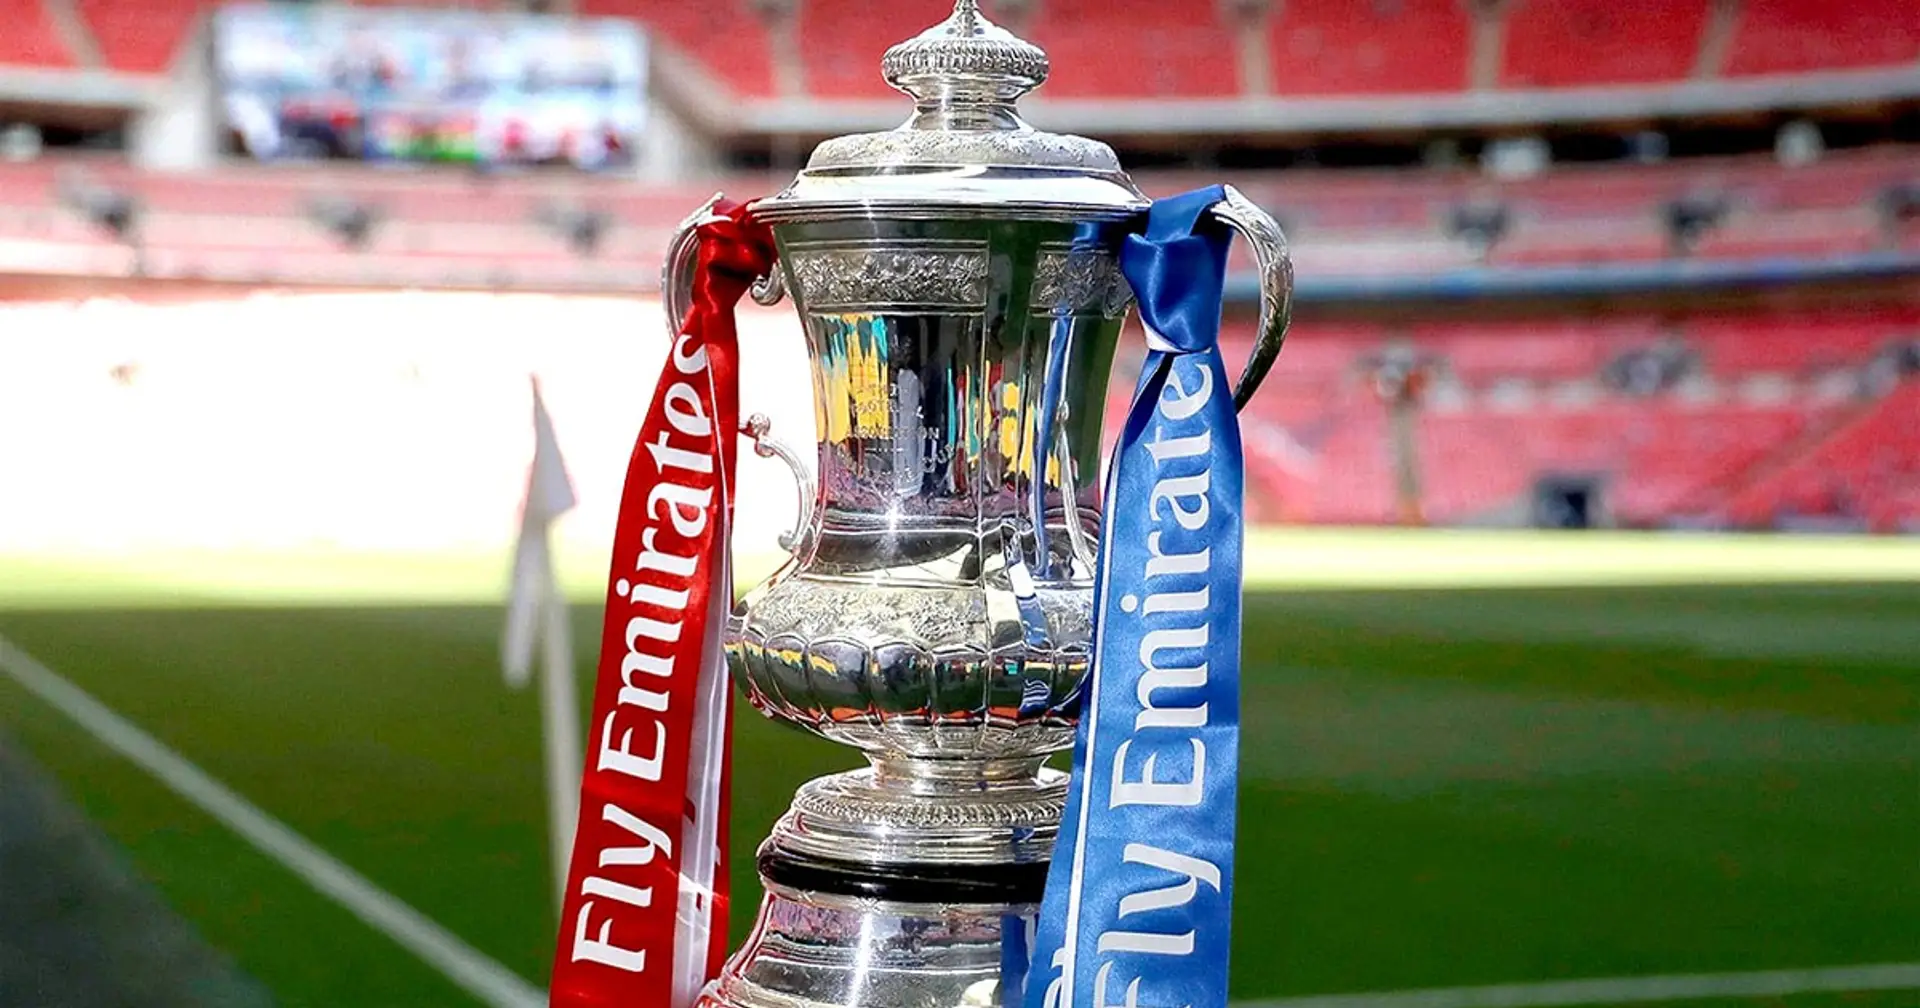 OFFICIAL: Liverpool to face Nottingham Forest or Huddersfield in FA Cup quarterfinal